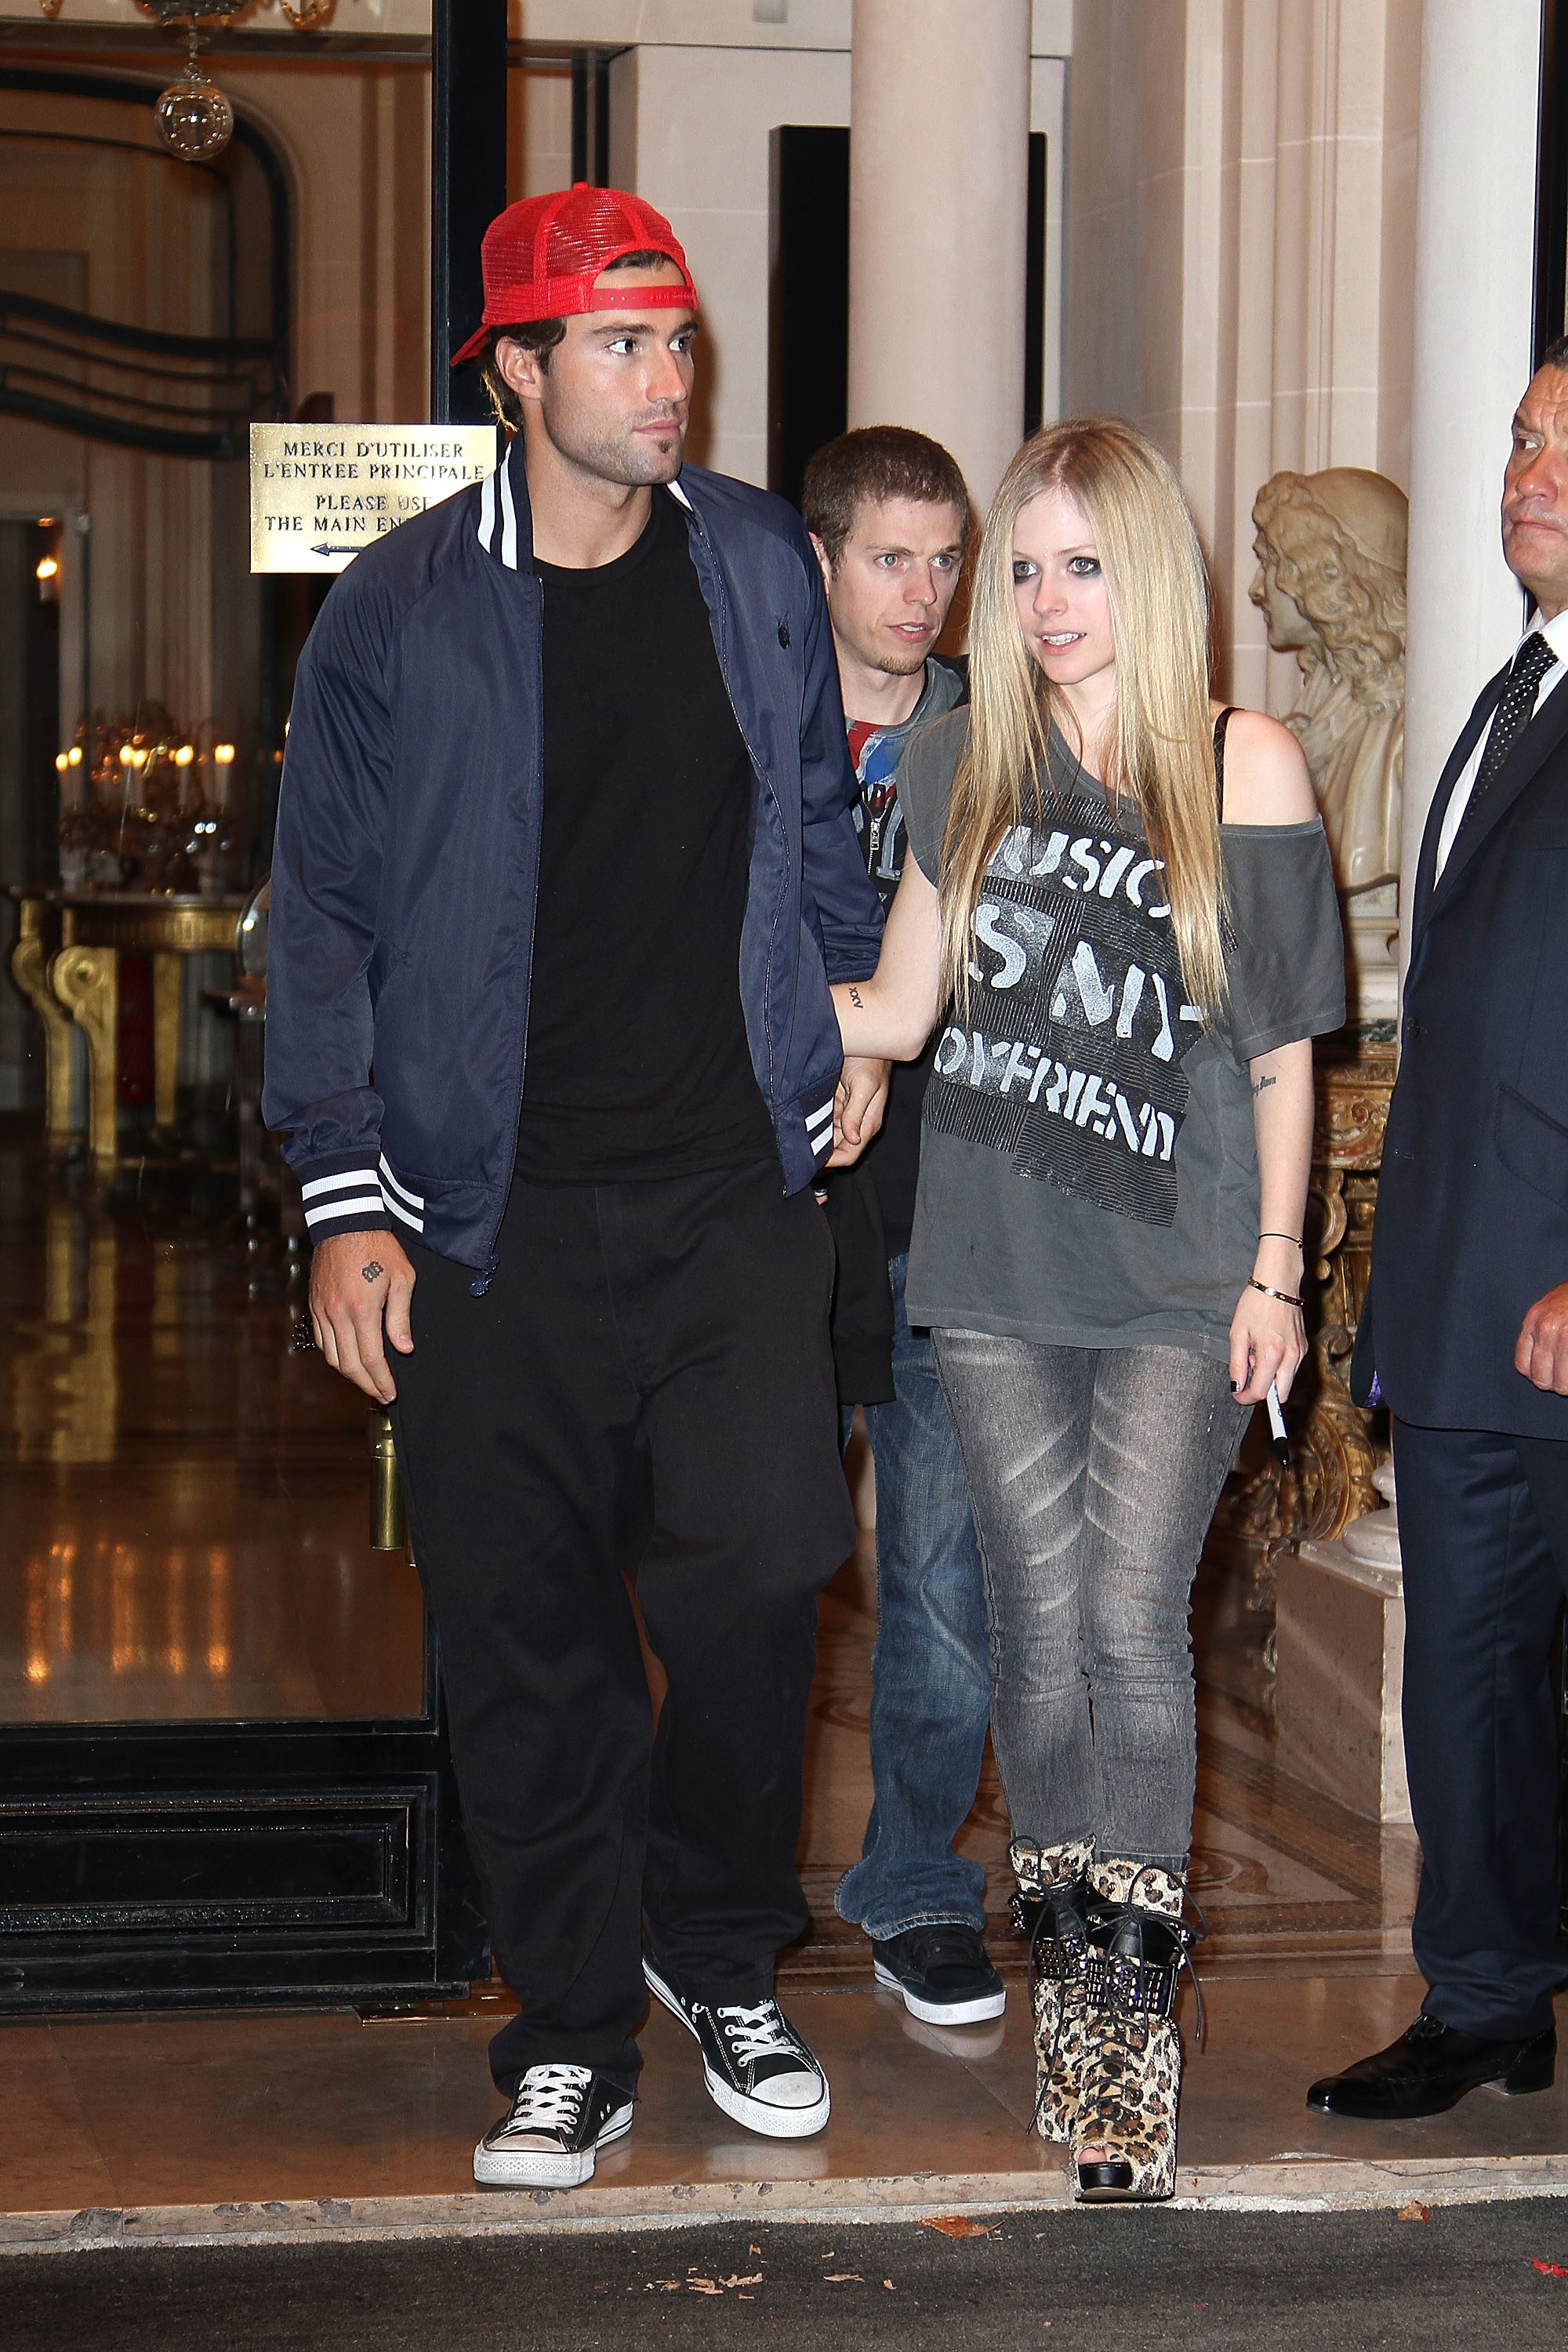 Brody in a cap and sneakers and Avril in a graphic tee and patterned pants exiting a building